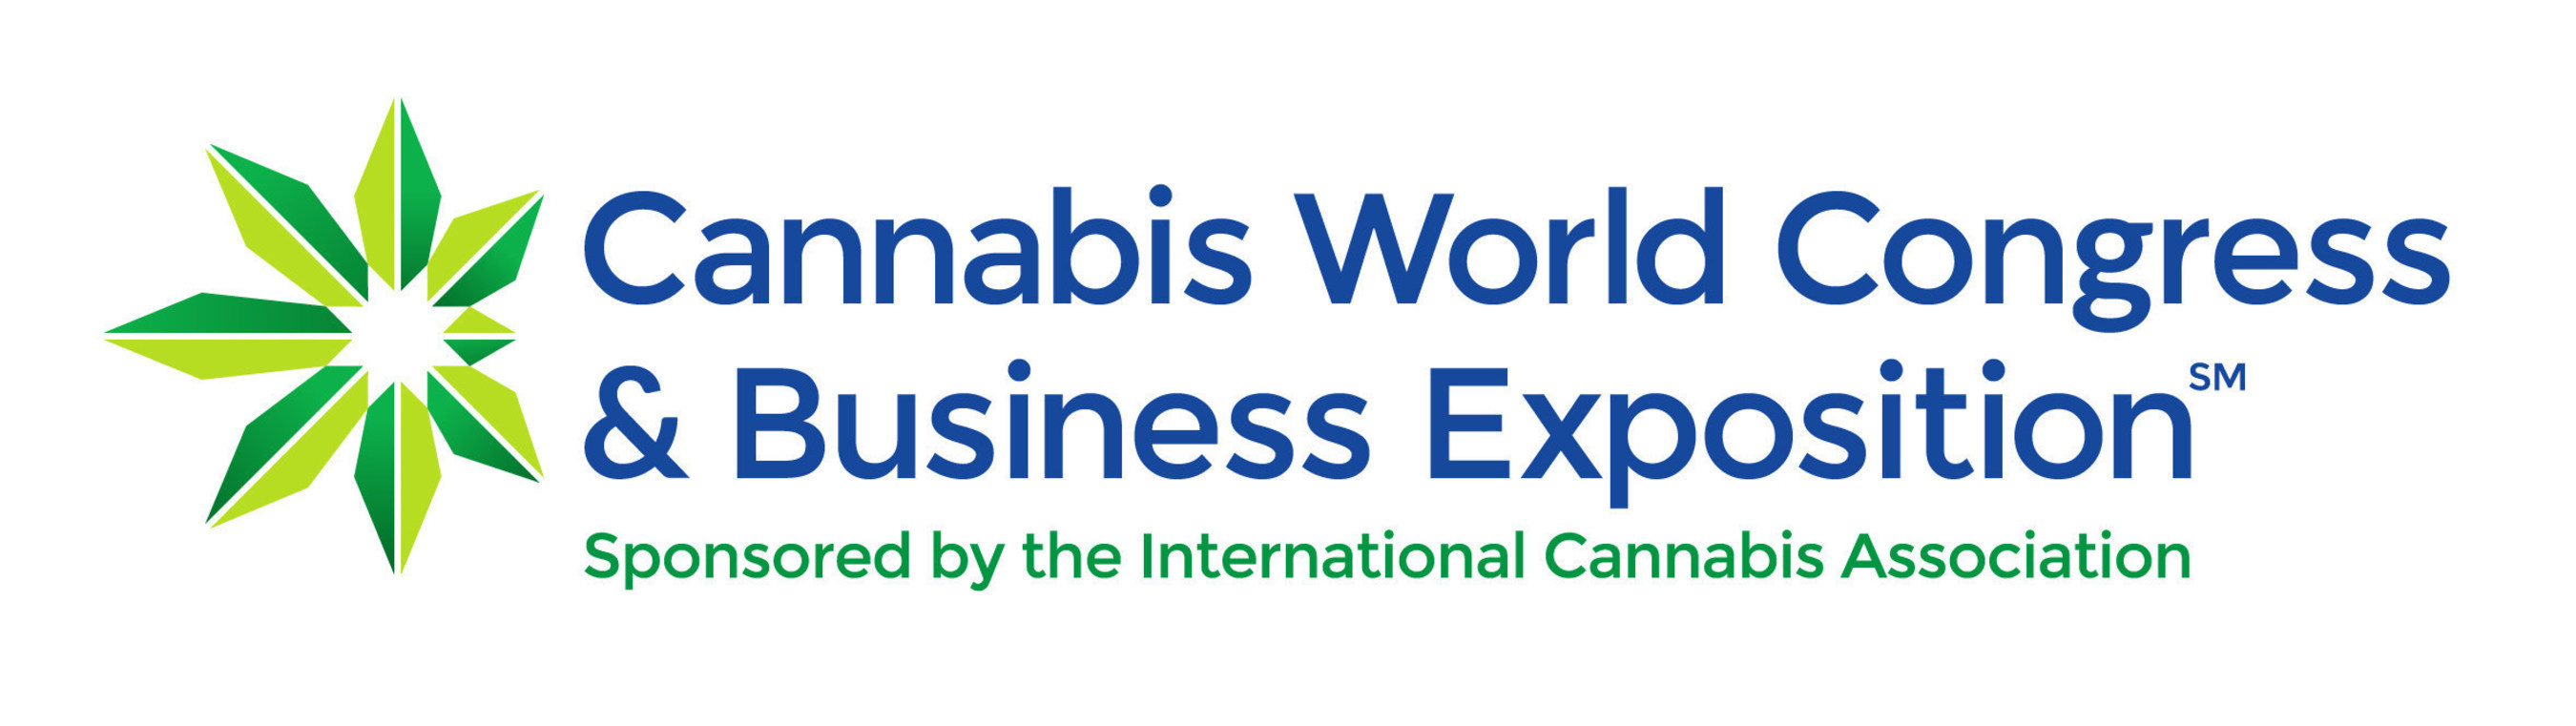 Cannabis World Congress & Business Expositions, www.cwcbexpo.com.